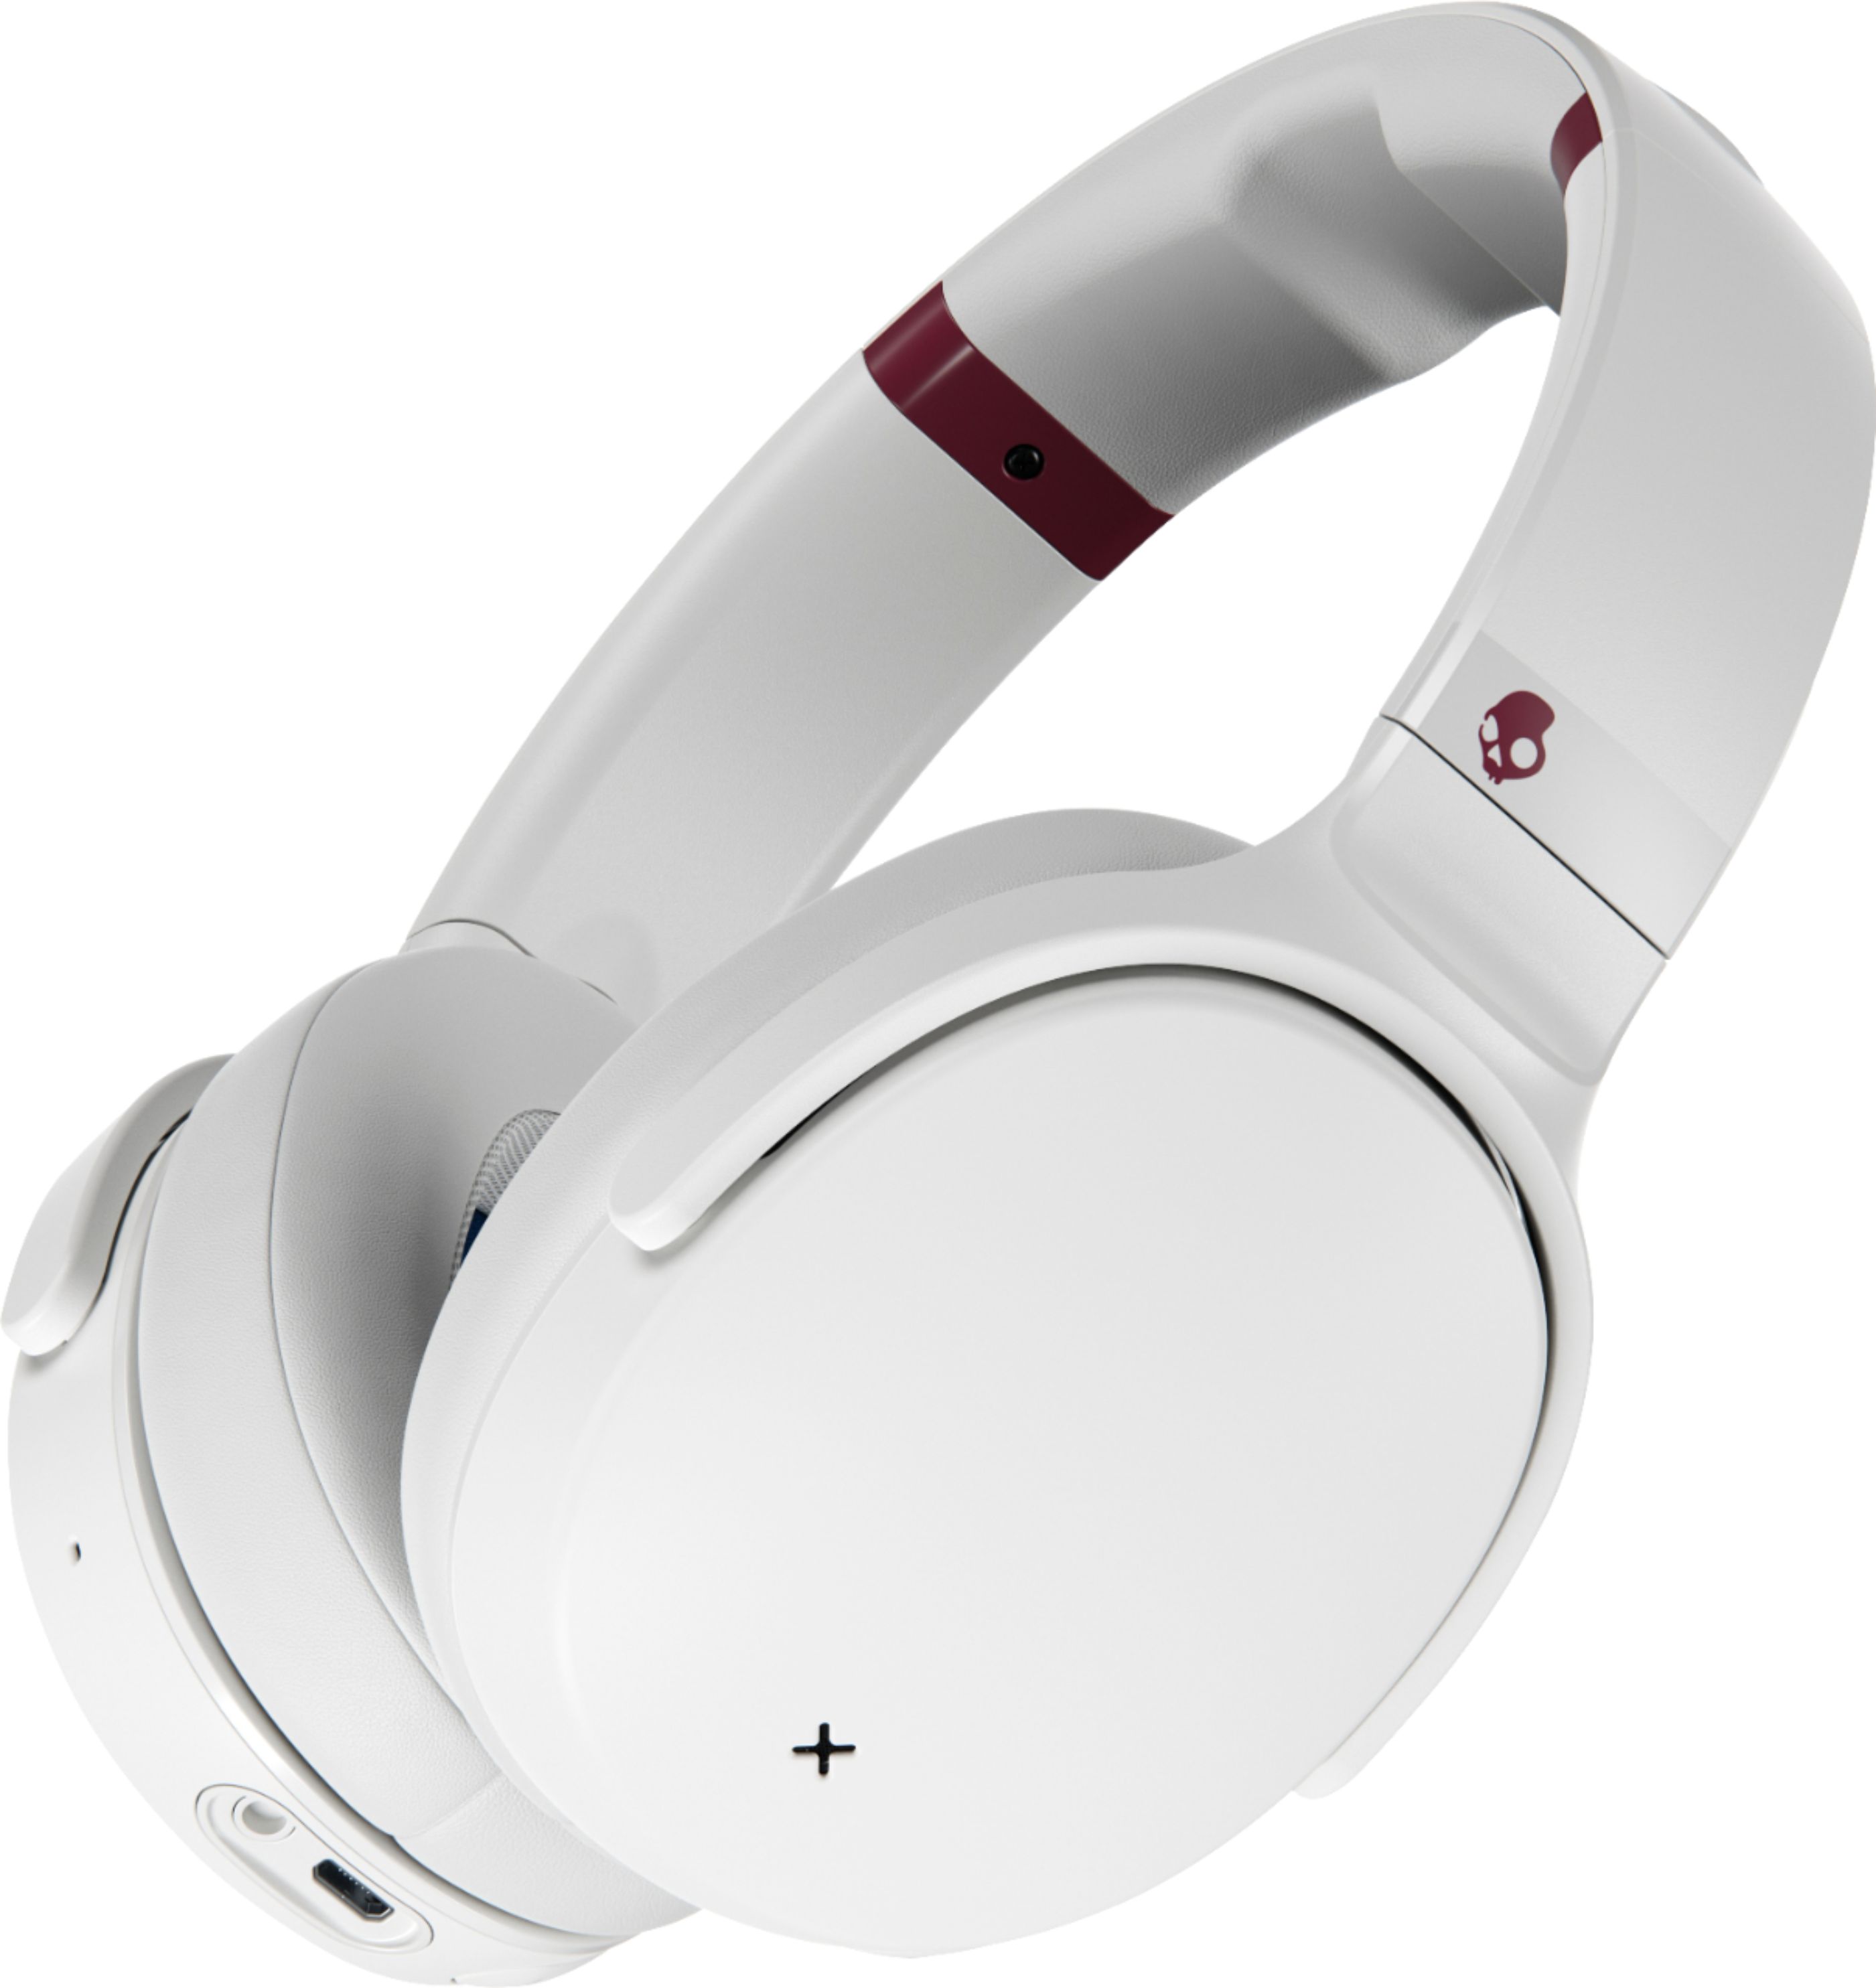 Customer Reviews Skullcandy Venue Wireless Noise Cancelling Over The Ear Headphones White S6hcw